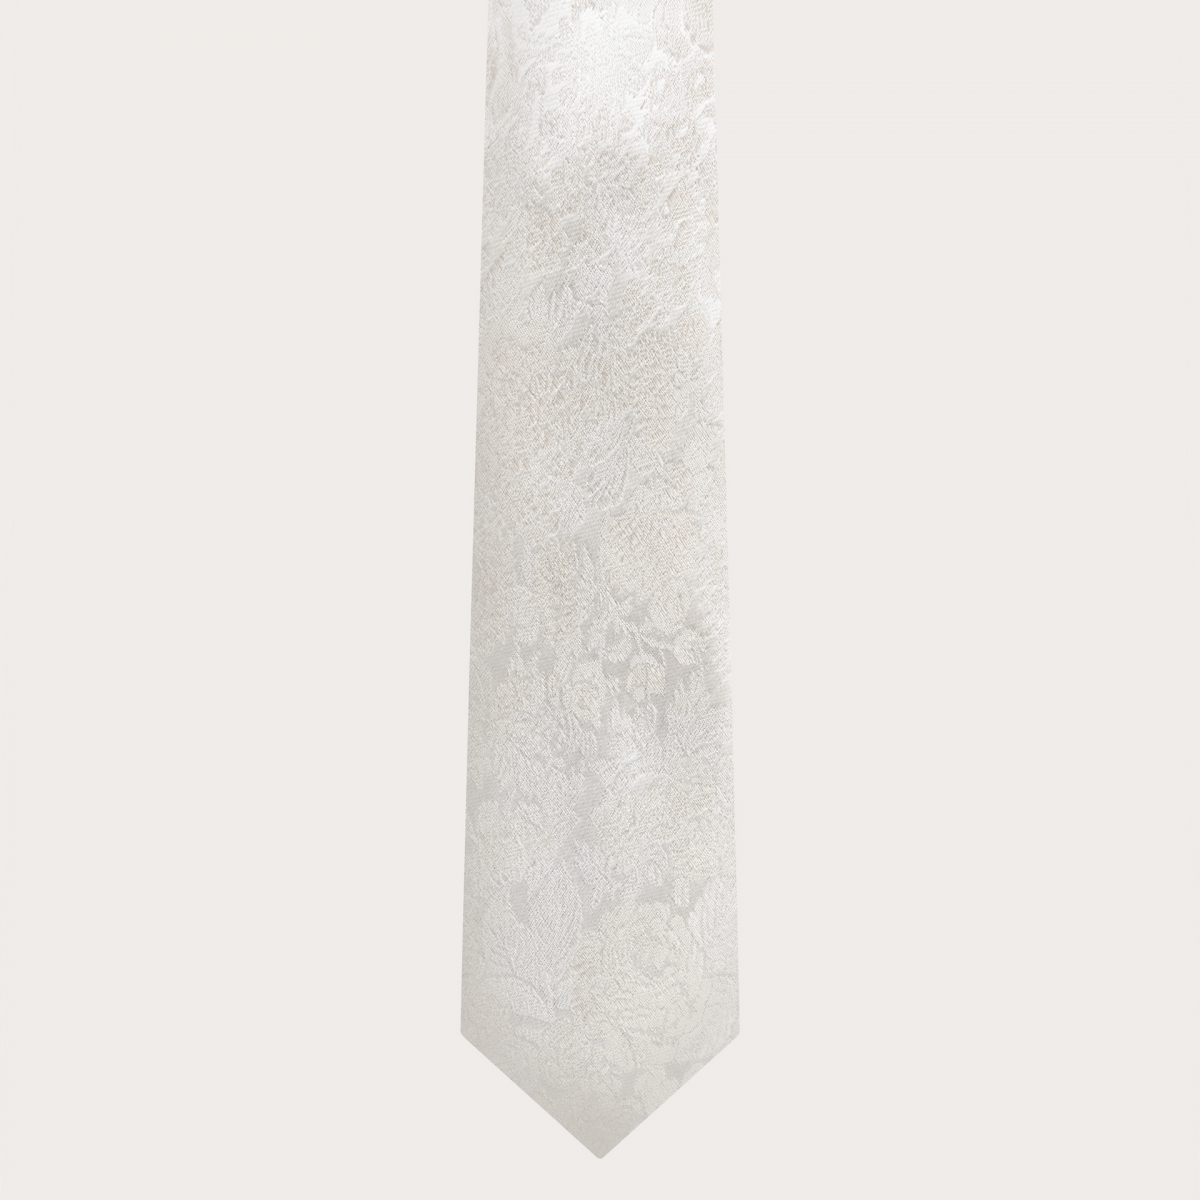 BRUCLE Wedding tie in refined white jacquard silk